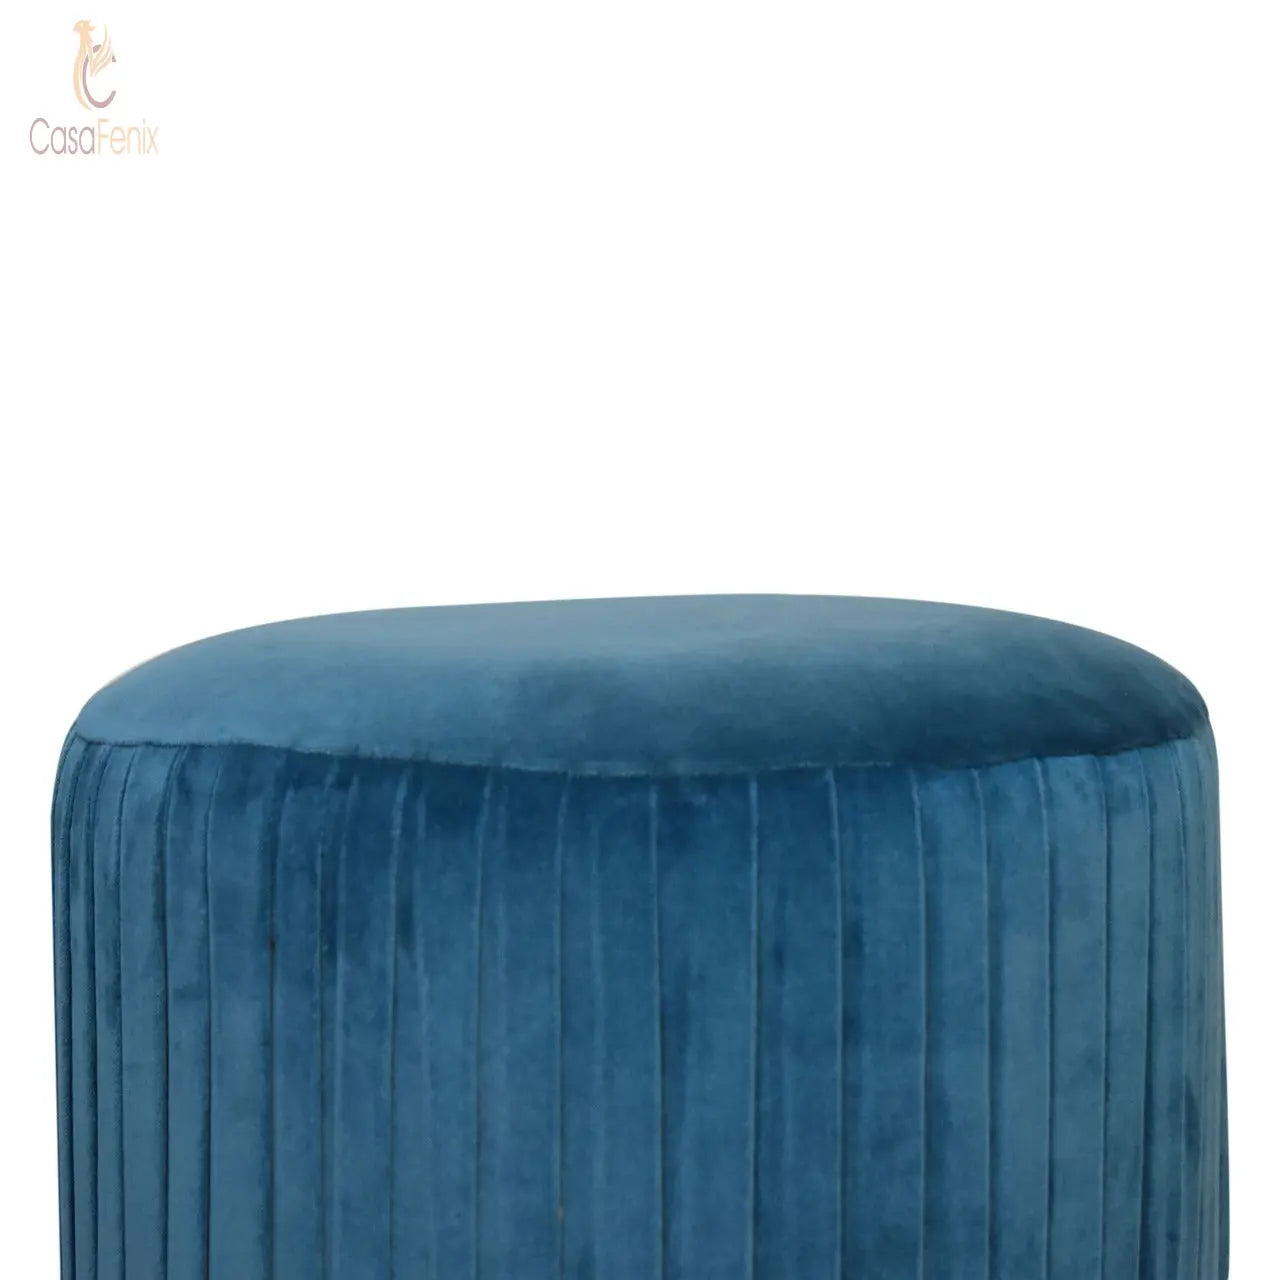 Teal Cotton Velvet Pleated Footstool with Gold Base - CasaFenix